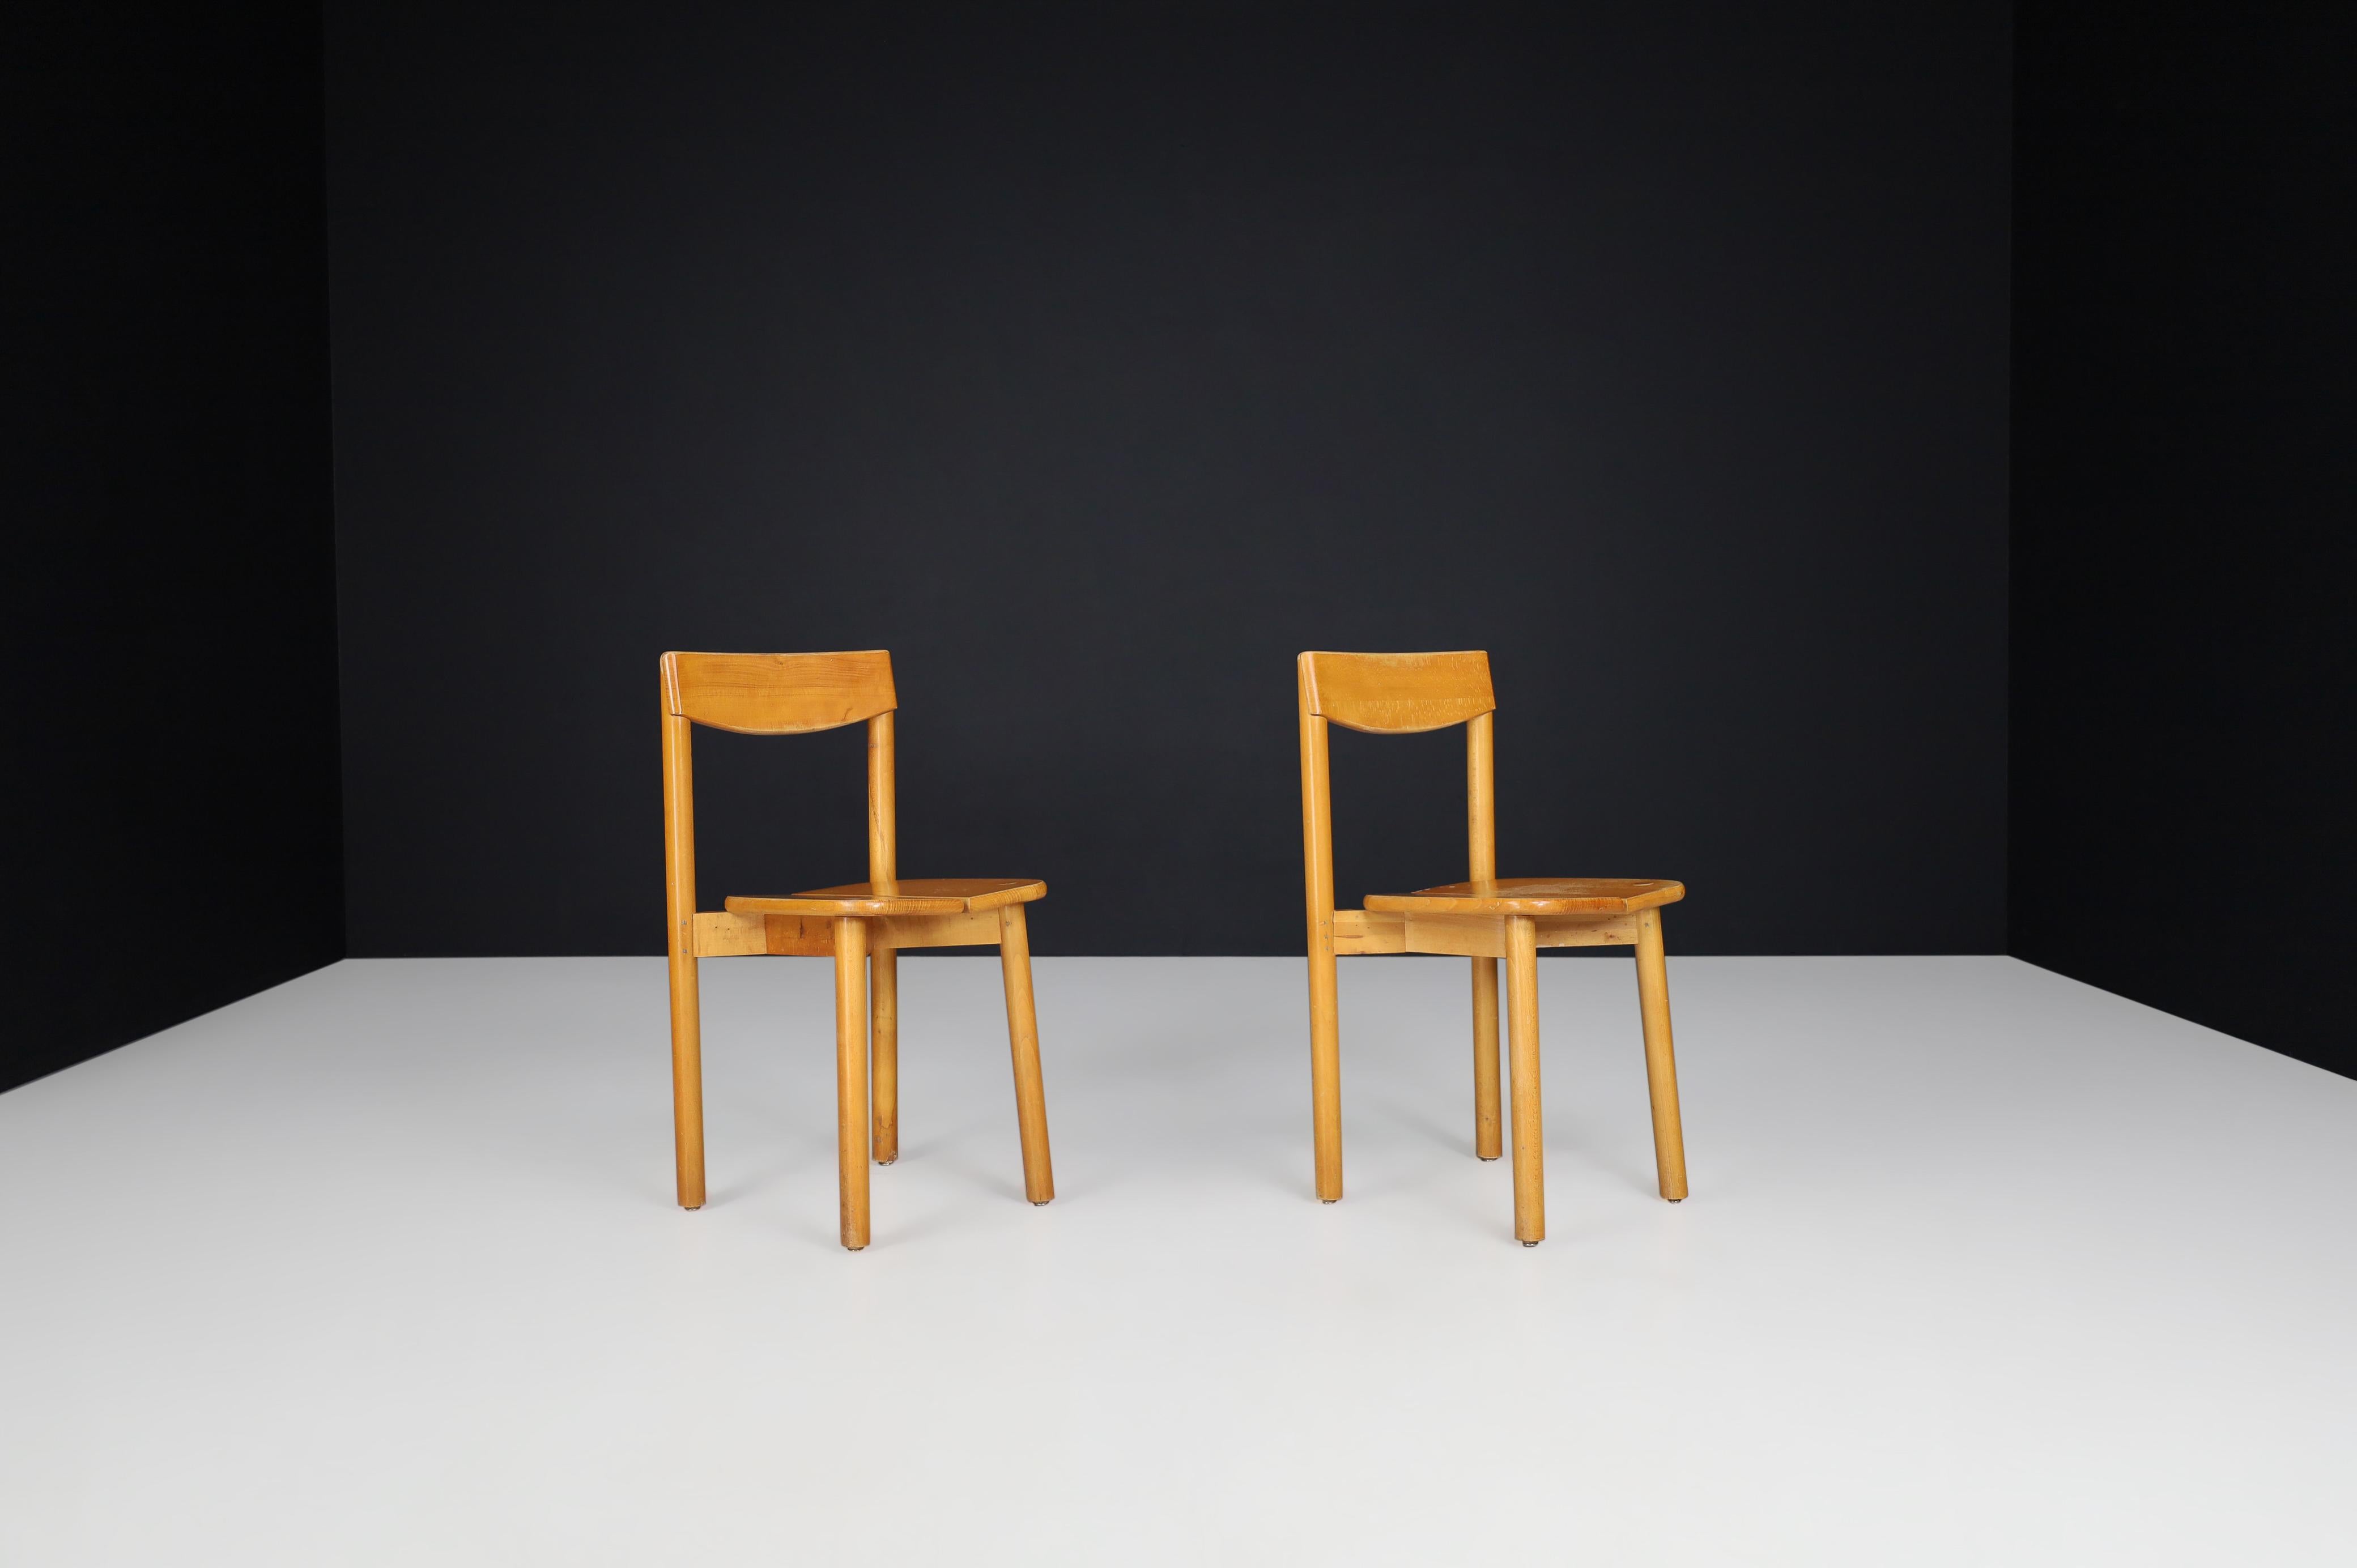 Pierre Gautier Solid Chairs in Blond Beech, France, 1960s For Sale 1